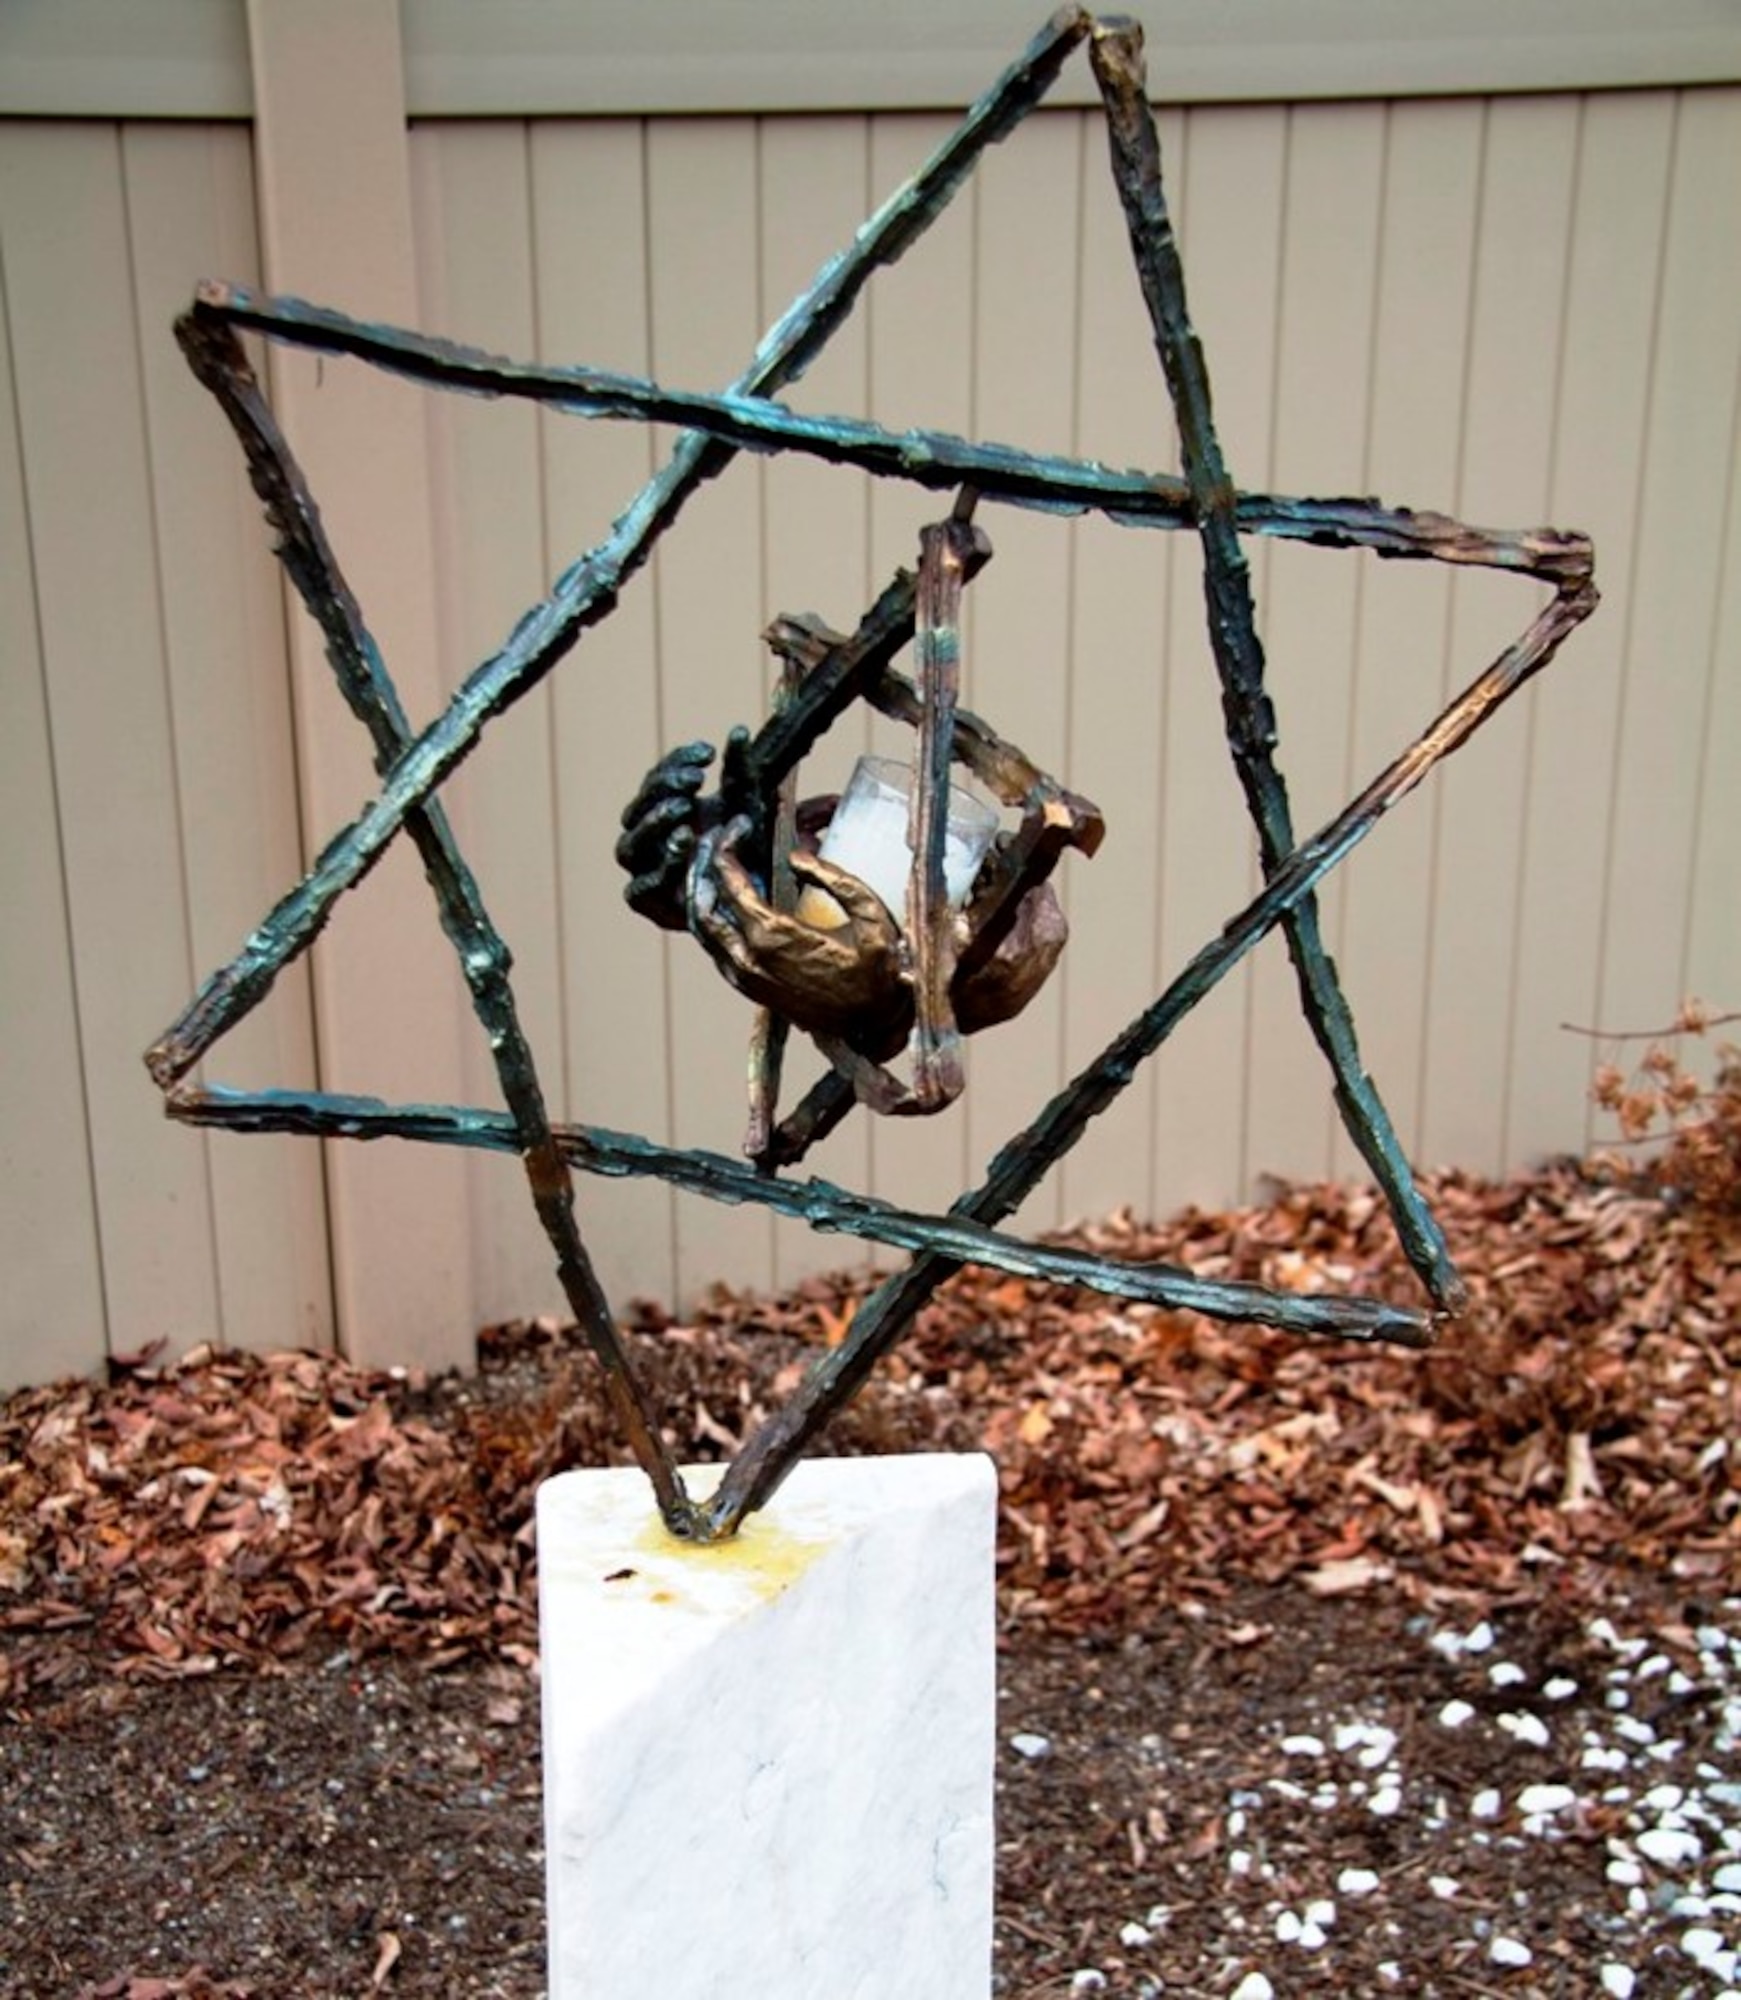 Fred Manasse, a survivor of the Holocaust, donated this sculpture he created to a cemetery in Milton, Massachusetts in 2012, where it was stolen in September 2016 and now is in the process of being replaced. The two Stars of David commemorate his sister and 1.5 million other child victims of the holocaust.  (Photo courtesy of Fred Manasse)